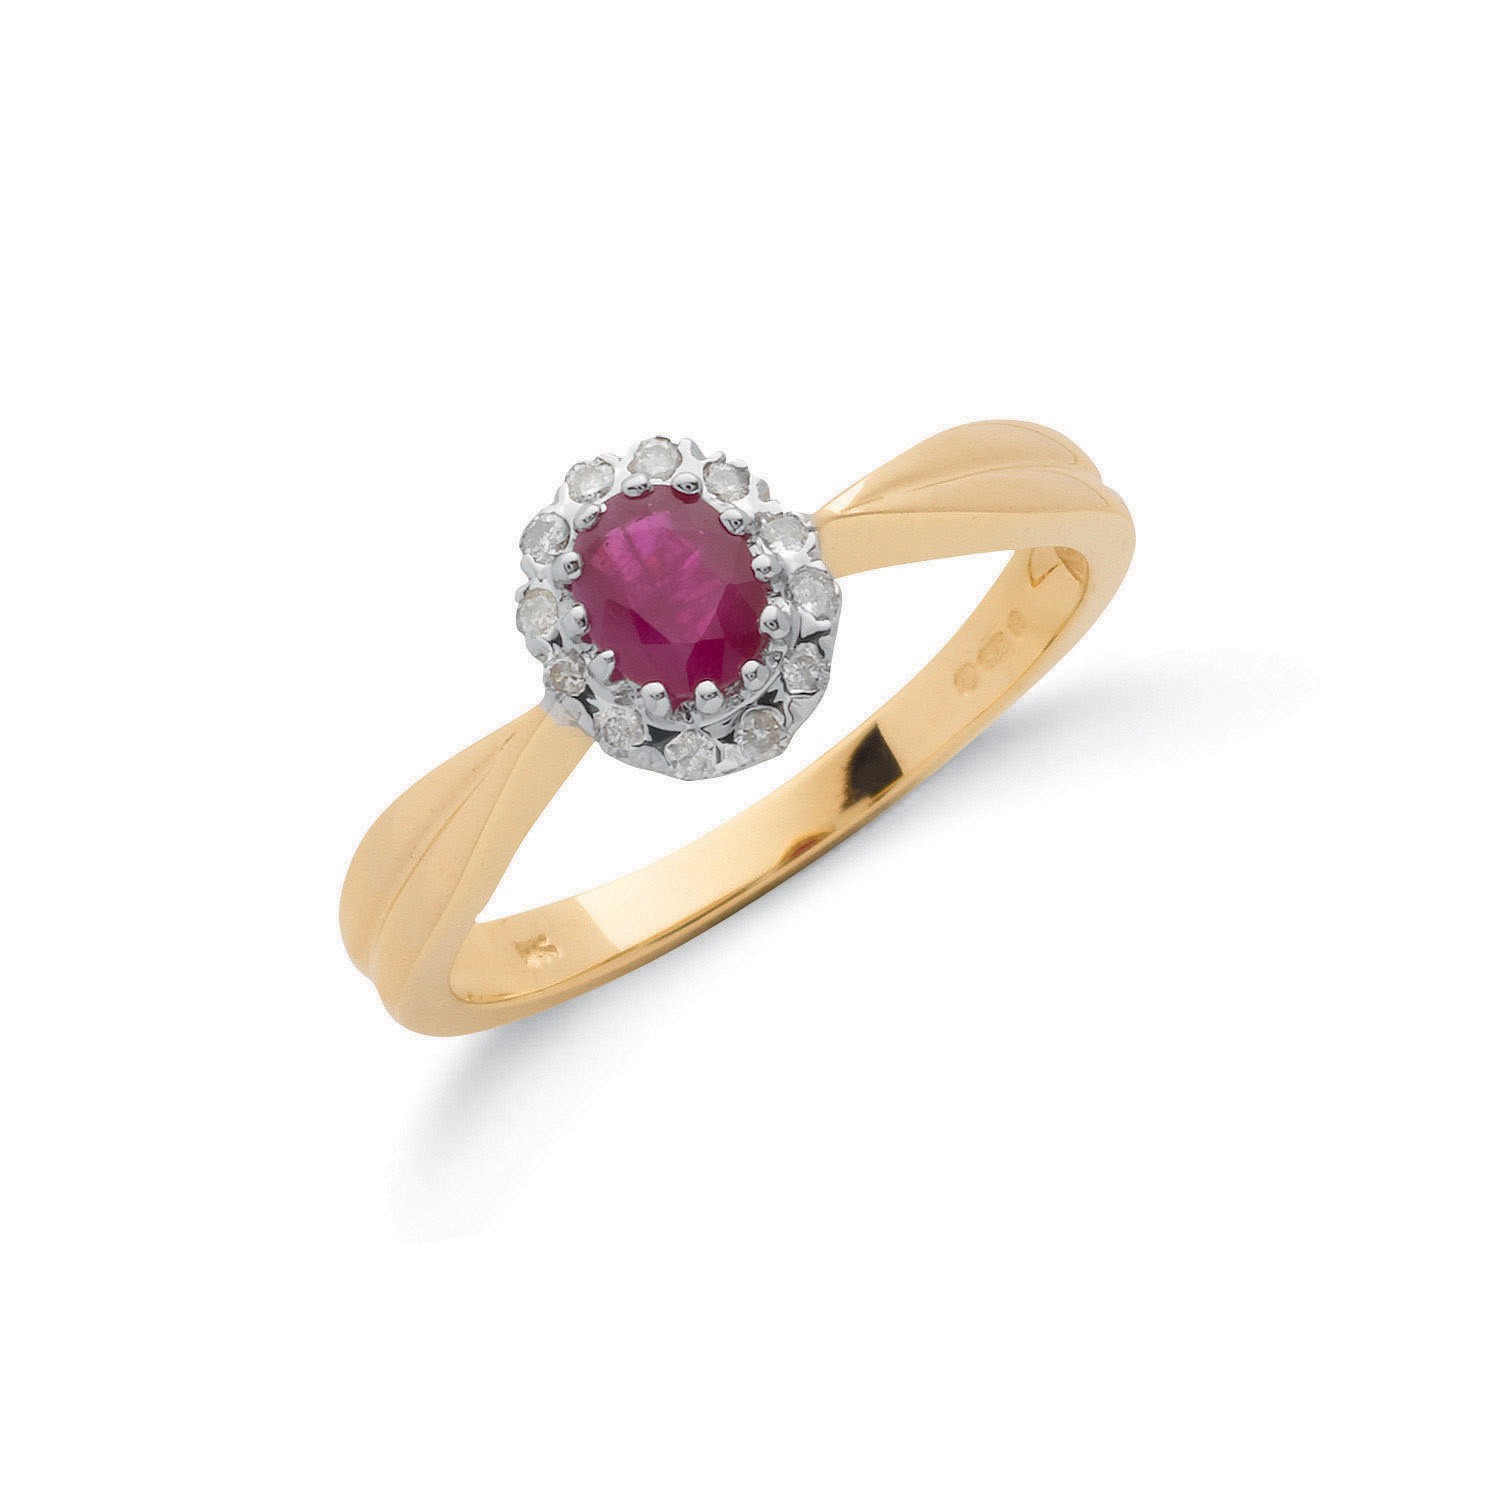 0.75 Carat Oval Cut Ruby Cluster Ring